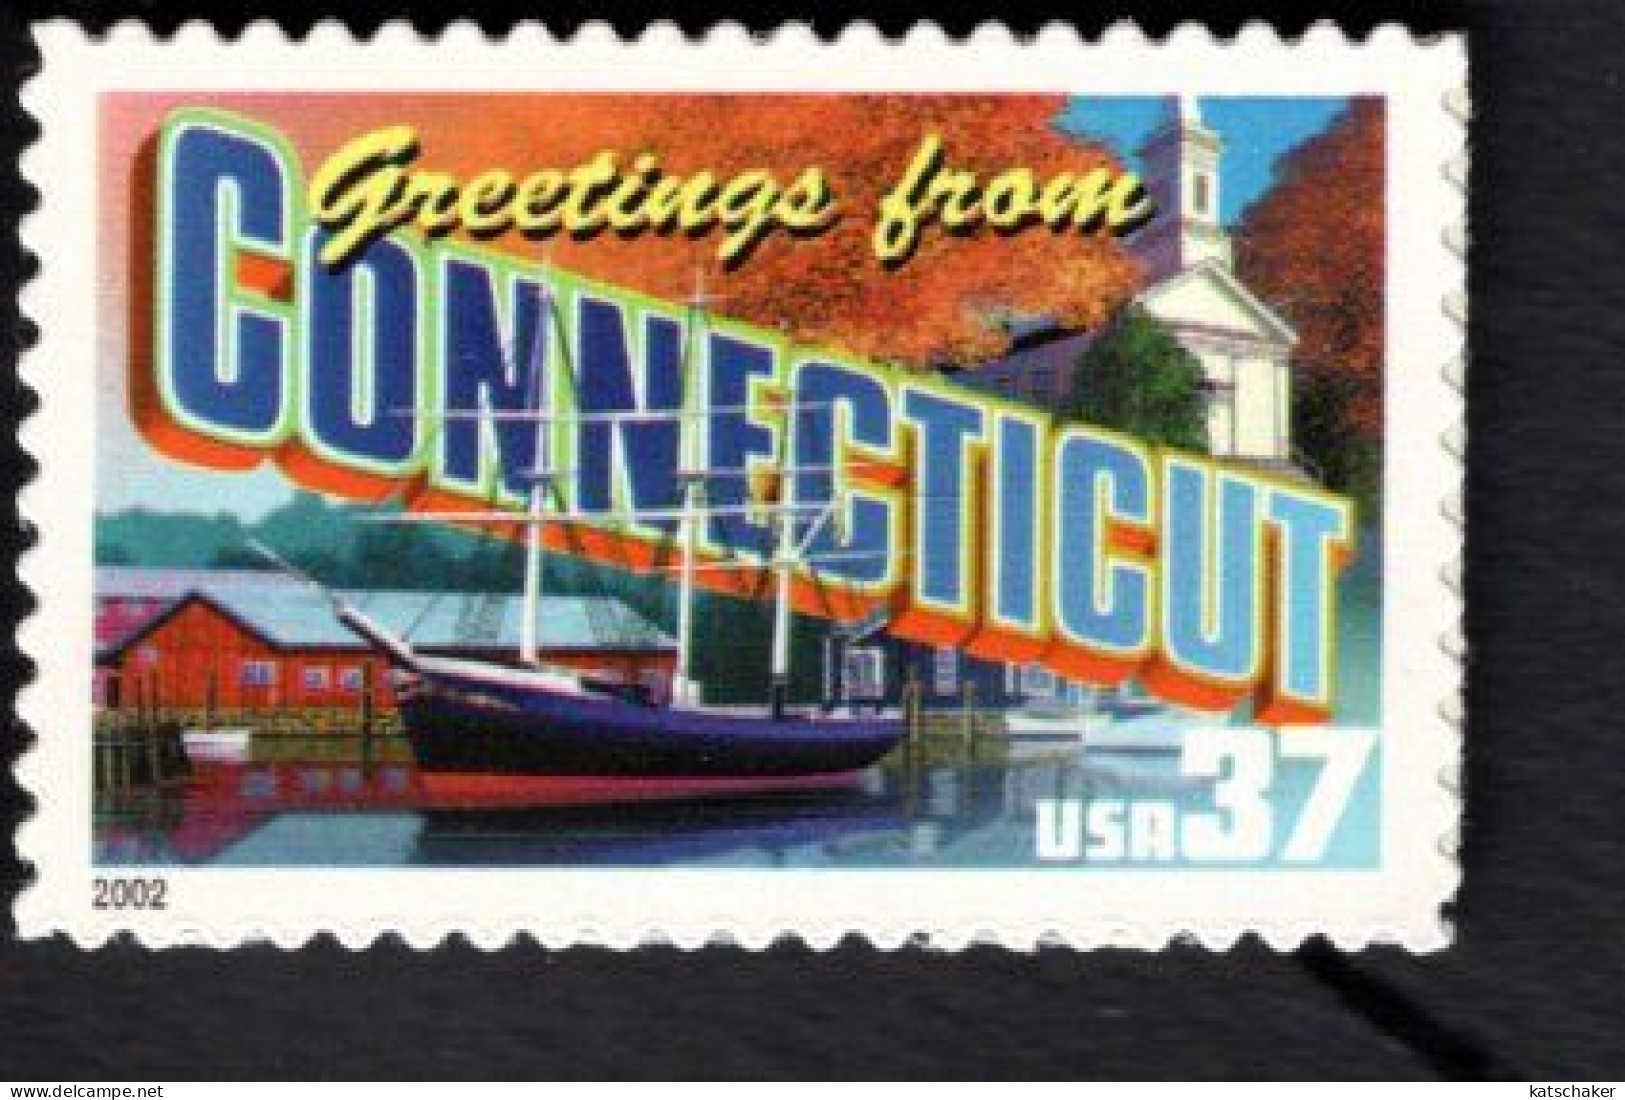 2017228952  2002  SCOTT 3702 (XX) POSTFRIS MINT NEVER HINGED - GREETINGS FROM AMERICA - CONNECTICUT - Ungebraucht